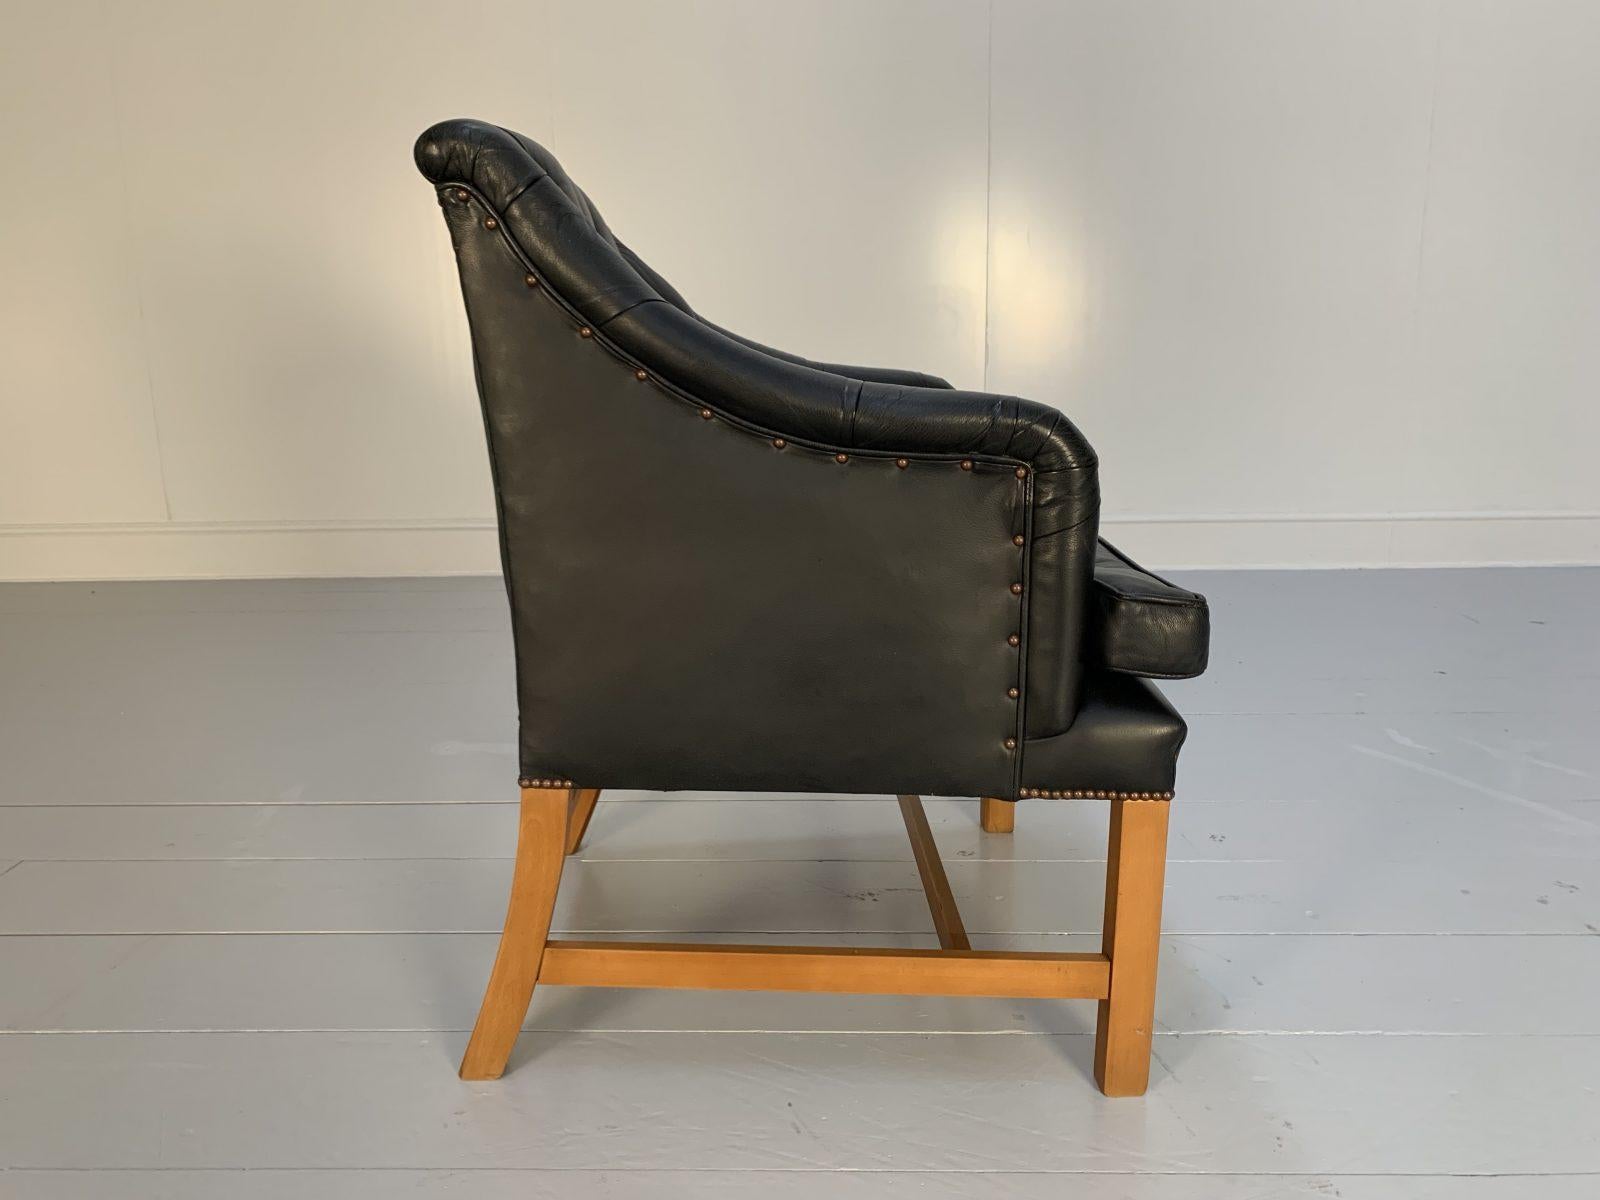 George Smith “Georgian” Armchair – in Antique Black Leather In Good Condition For Sale In Barrowford, GB